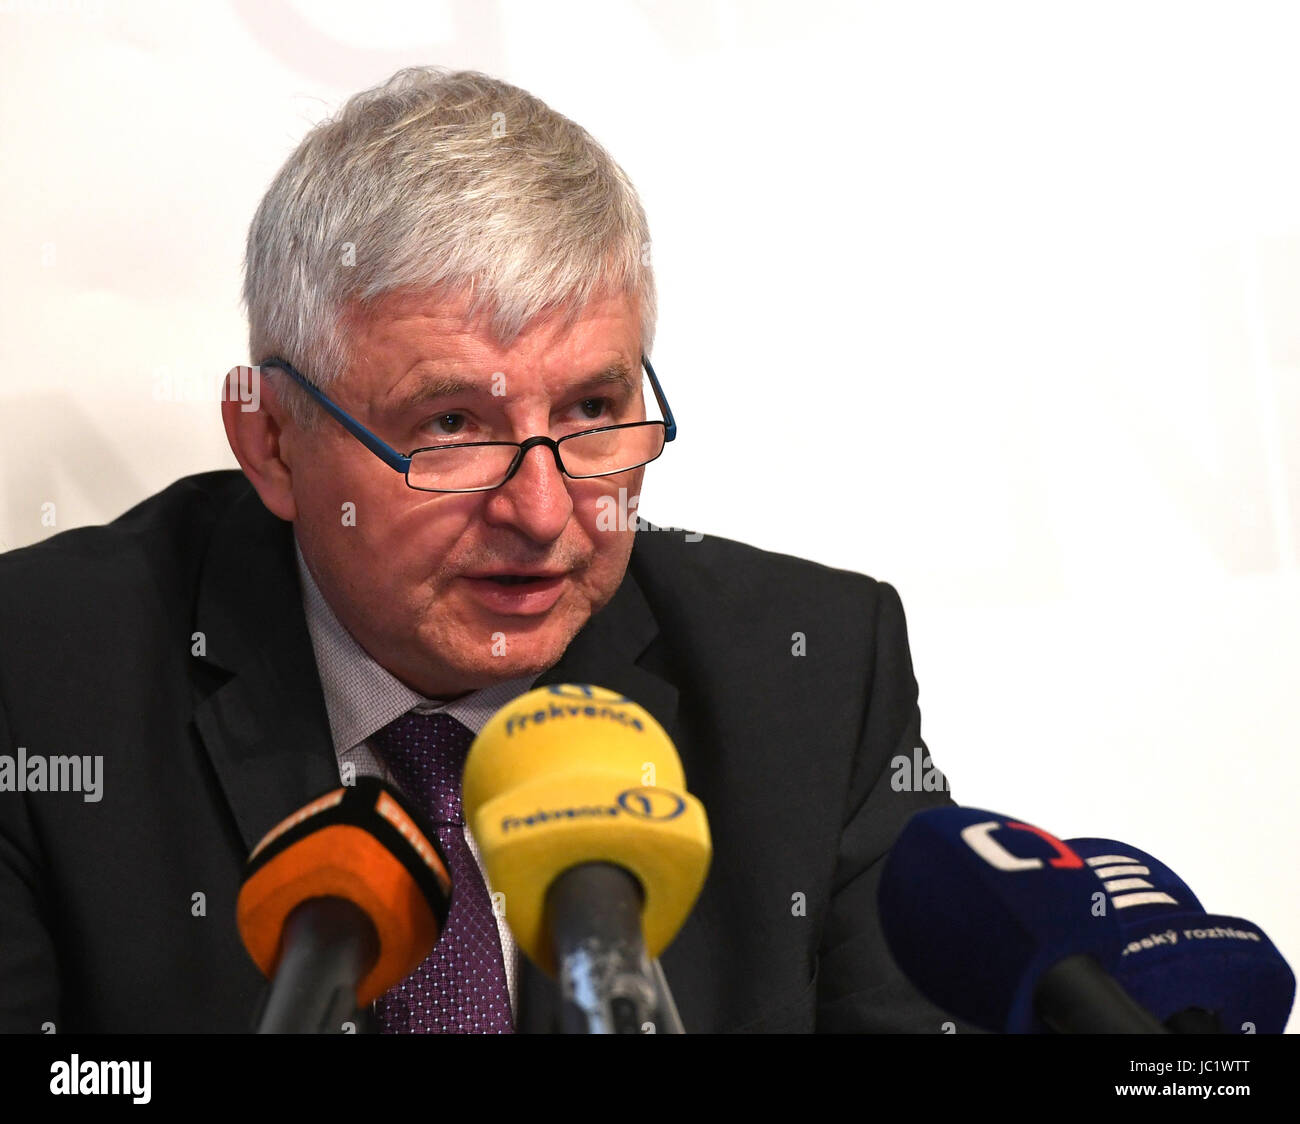 Czech National Bank (CNB) governor Jiri Rusnok speaks at a press conference on release of Report on Financial Stability 2016/2017 in Prague, Czech Republic, June 13, 2017. 'The domestic economy has shifted further into a growth phase of the financial cycle, characterised by rapid growth in loans. It is necessary to use good times for provisioning, as provisions enable the banking sector to operate smoothly in worse times,' CNB governor Jiri Rusnok said. (CTK Photo/Michal Krumphanzl) Stock Photo